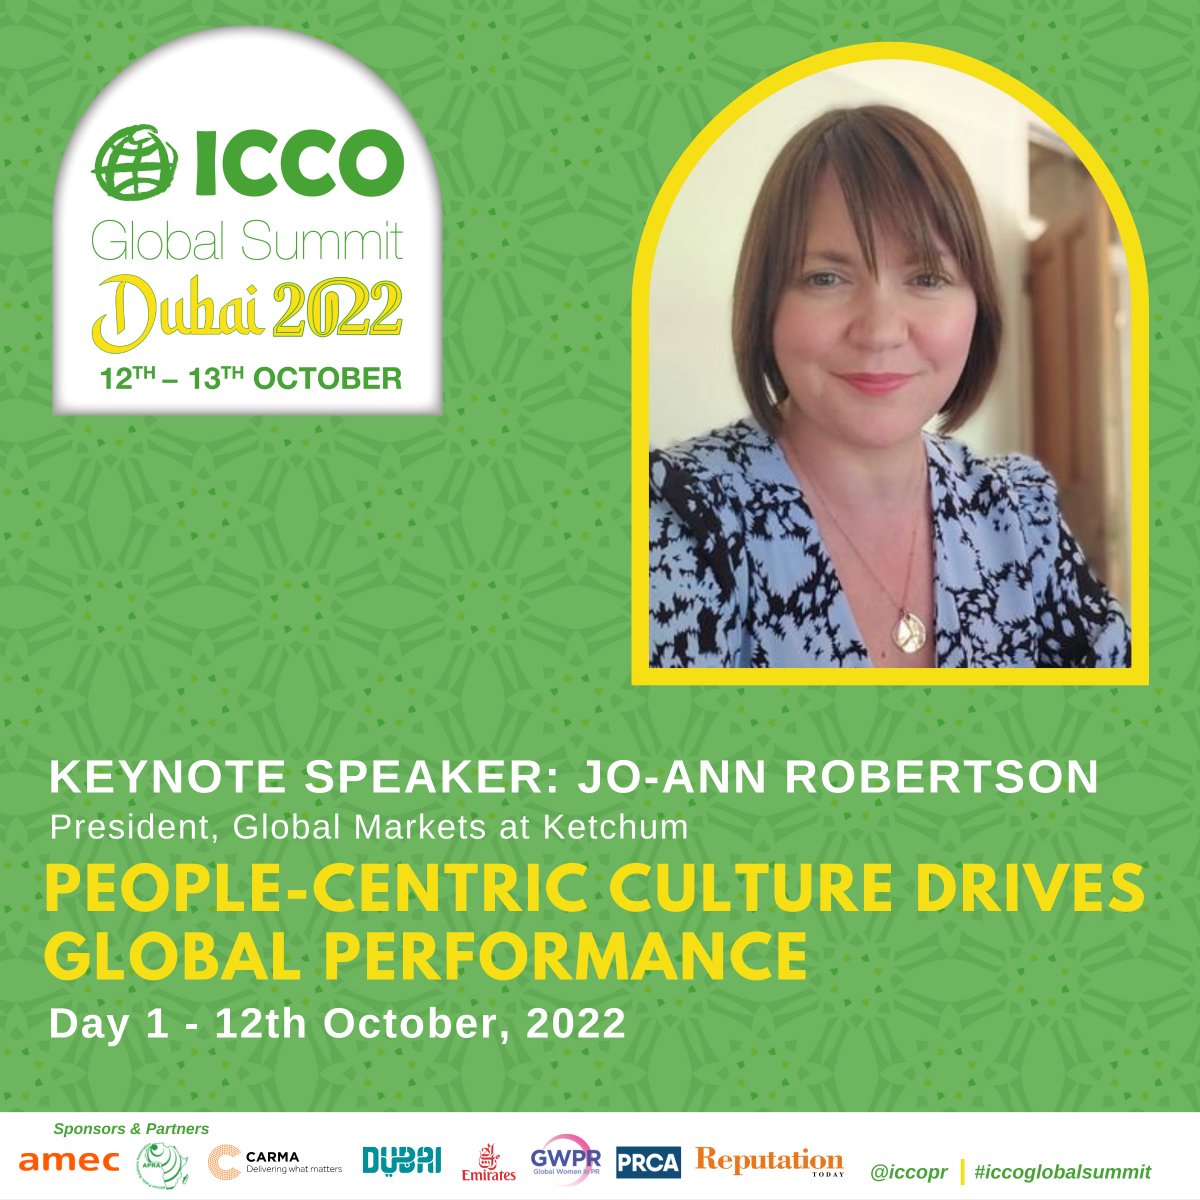 We are pleased to announce that @RedRobertino, @KetchumPR President, Global Markets, is also confirmed to speak at the #ICCOGlobalSummit! 

Jo-ann’s leadership spans the agency’s operations across the UK, Germany, Brazil, Canada, Belgium & Austria. 

More iccosummit.org